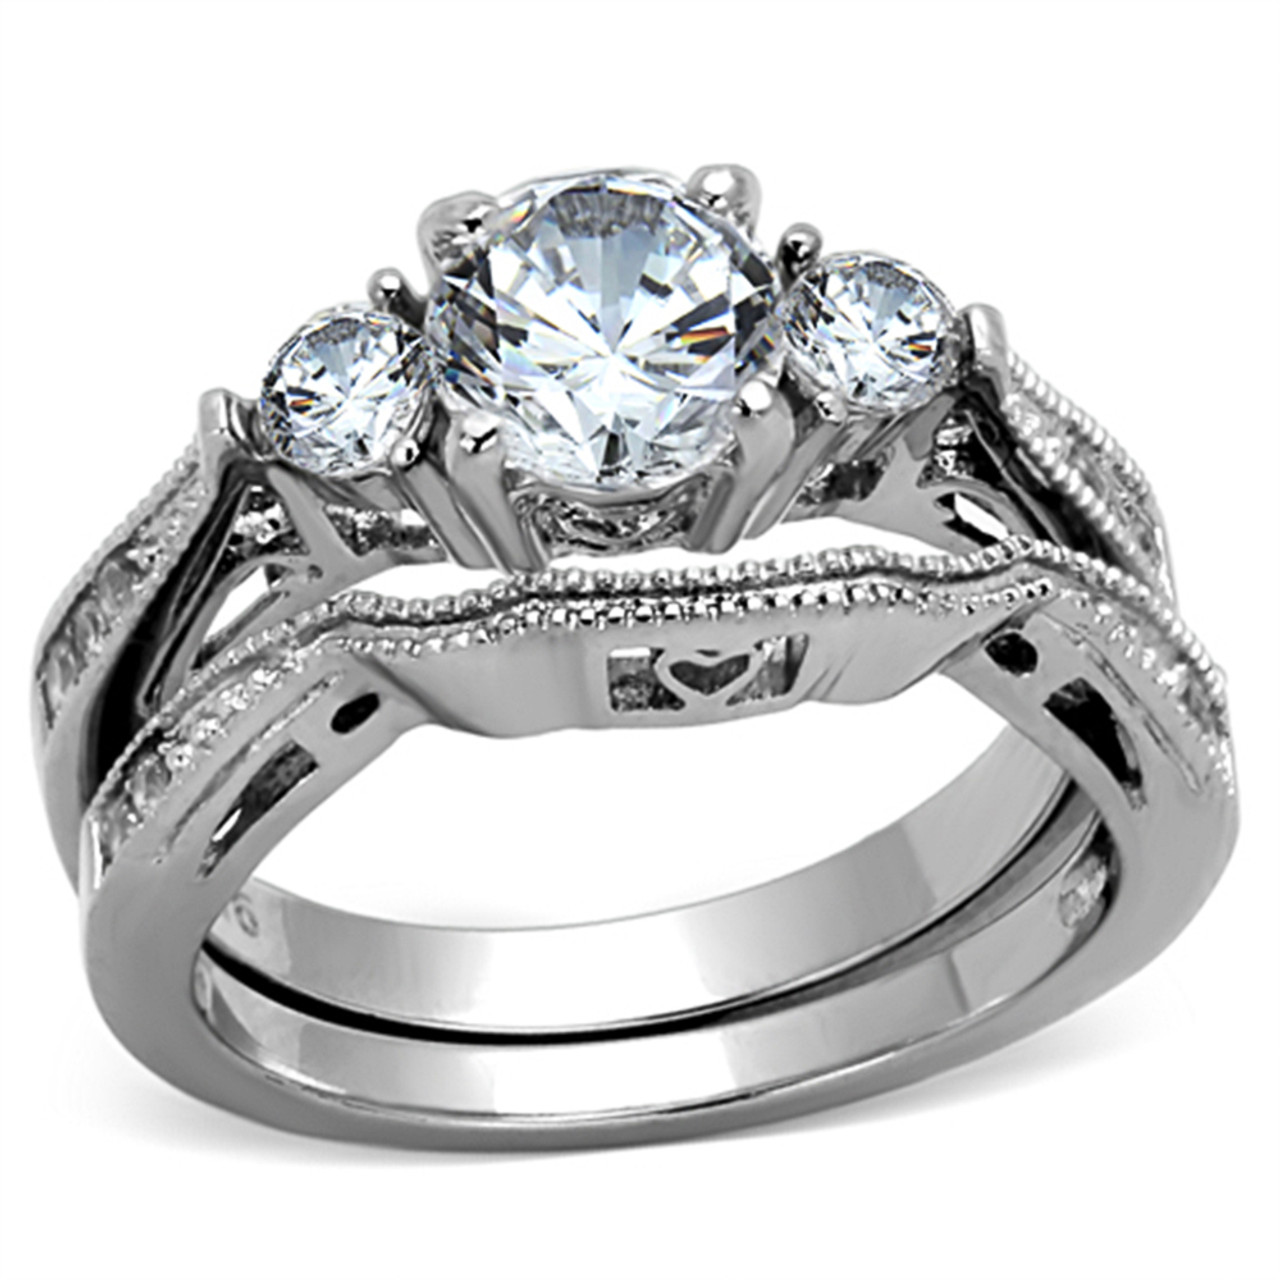 Fancy Ring With Flawless Cubic Zirconia Diamond at Best Price in Bangkok |  Glam Diamond